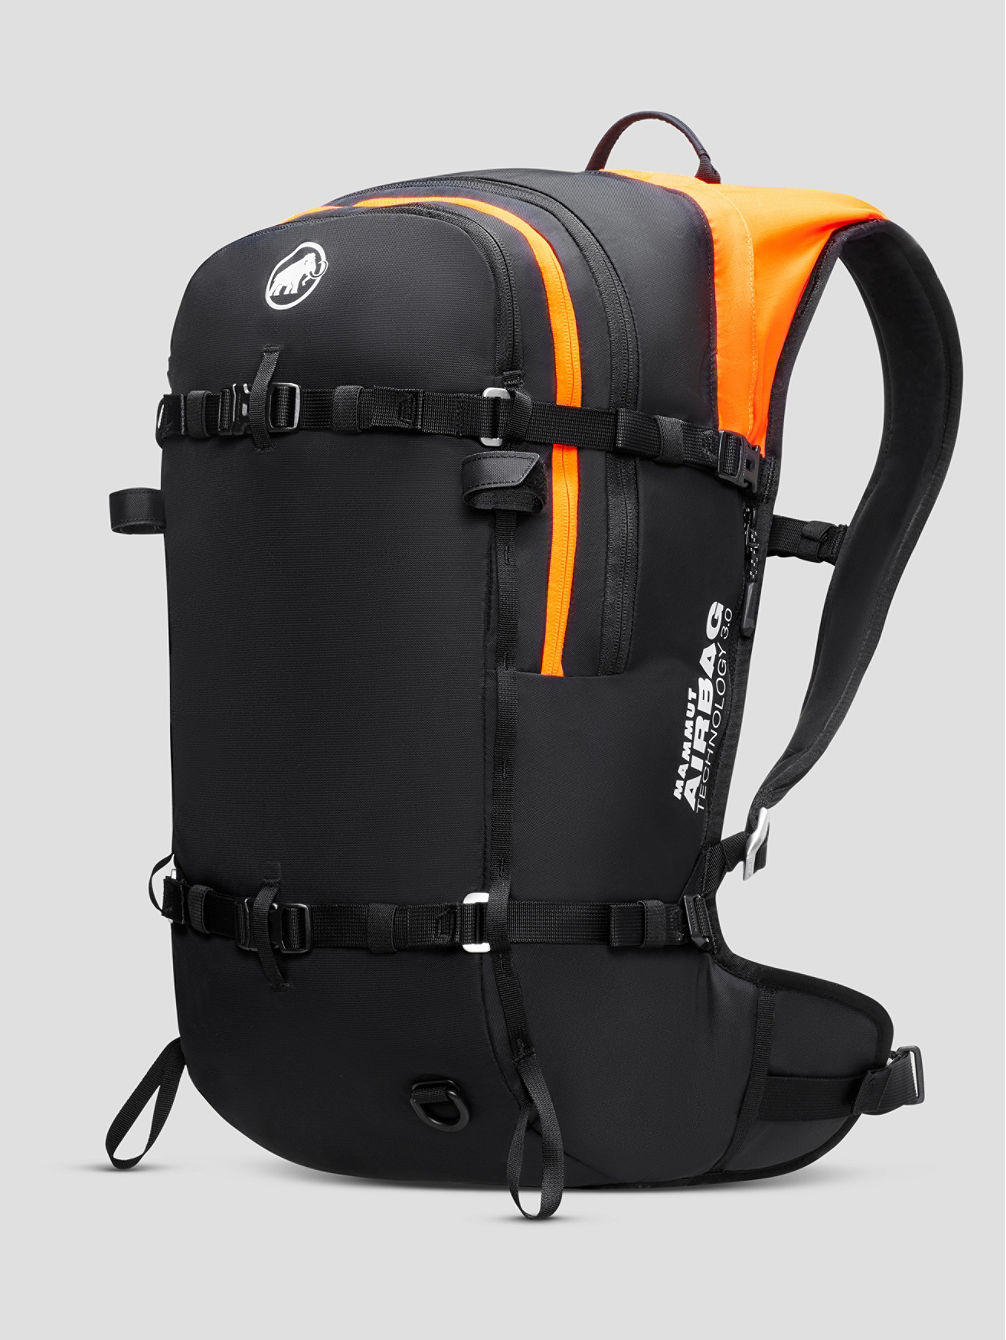 Free 28 Removable Airbag 3.0 Backpack